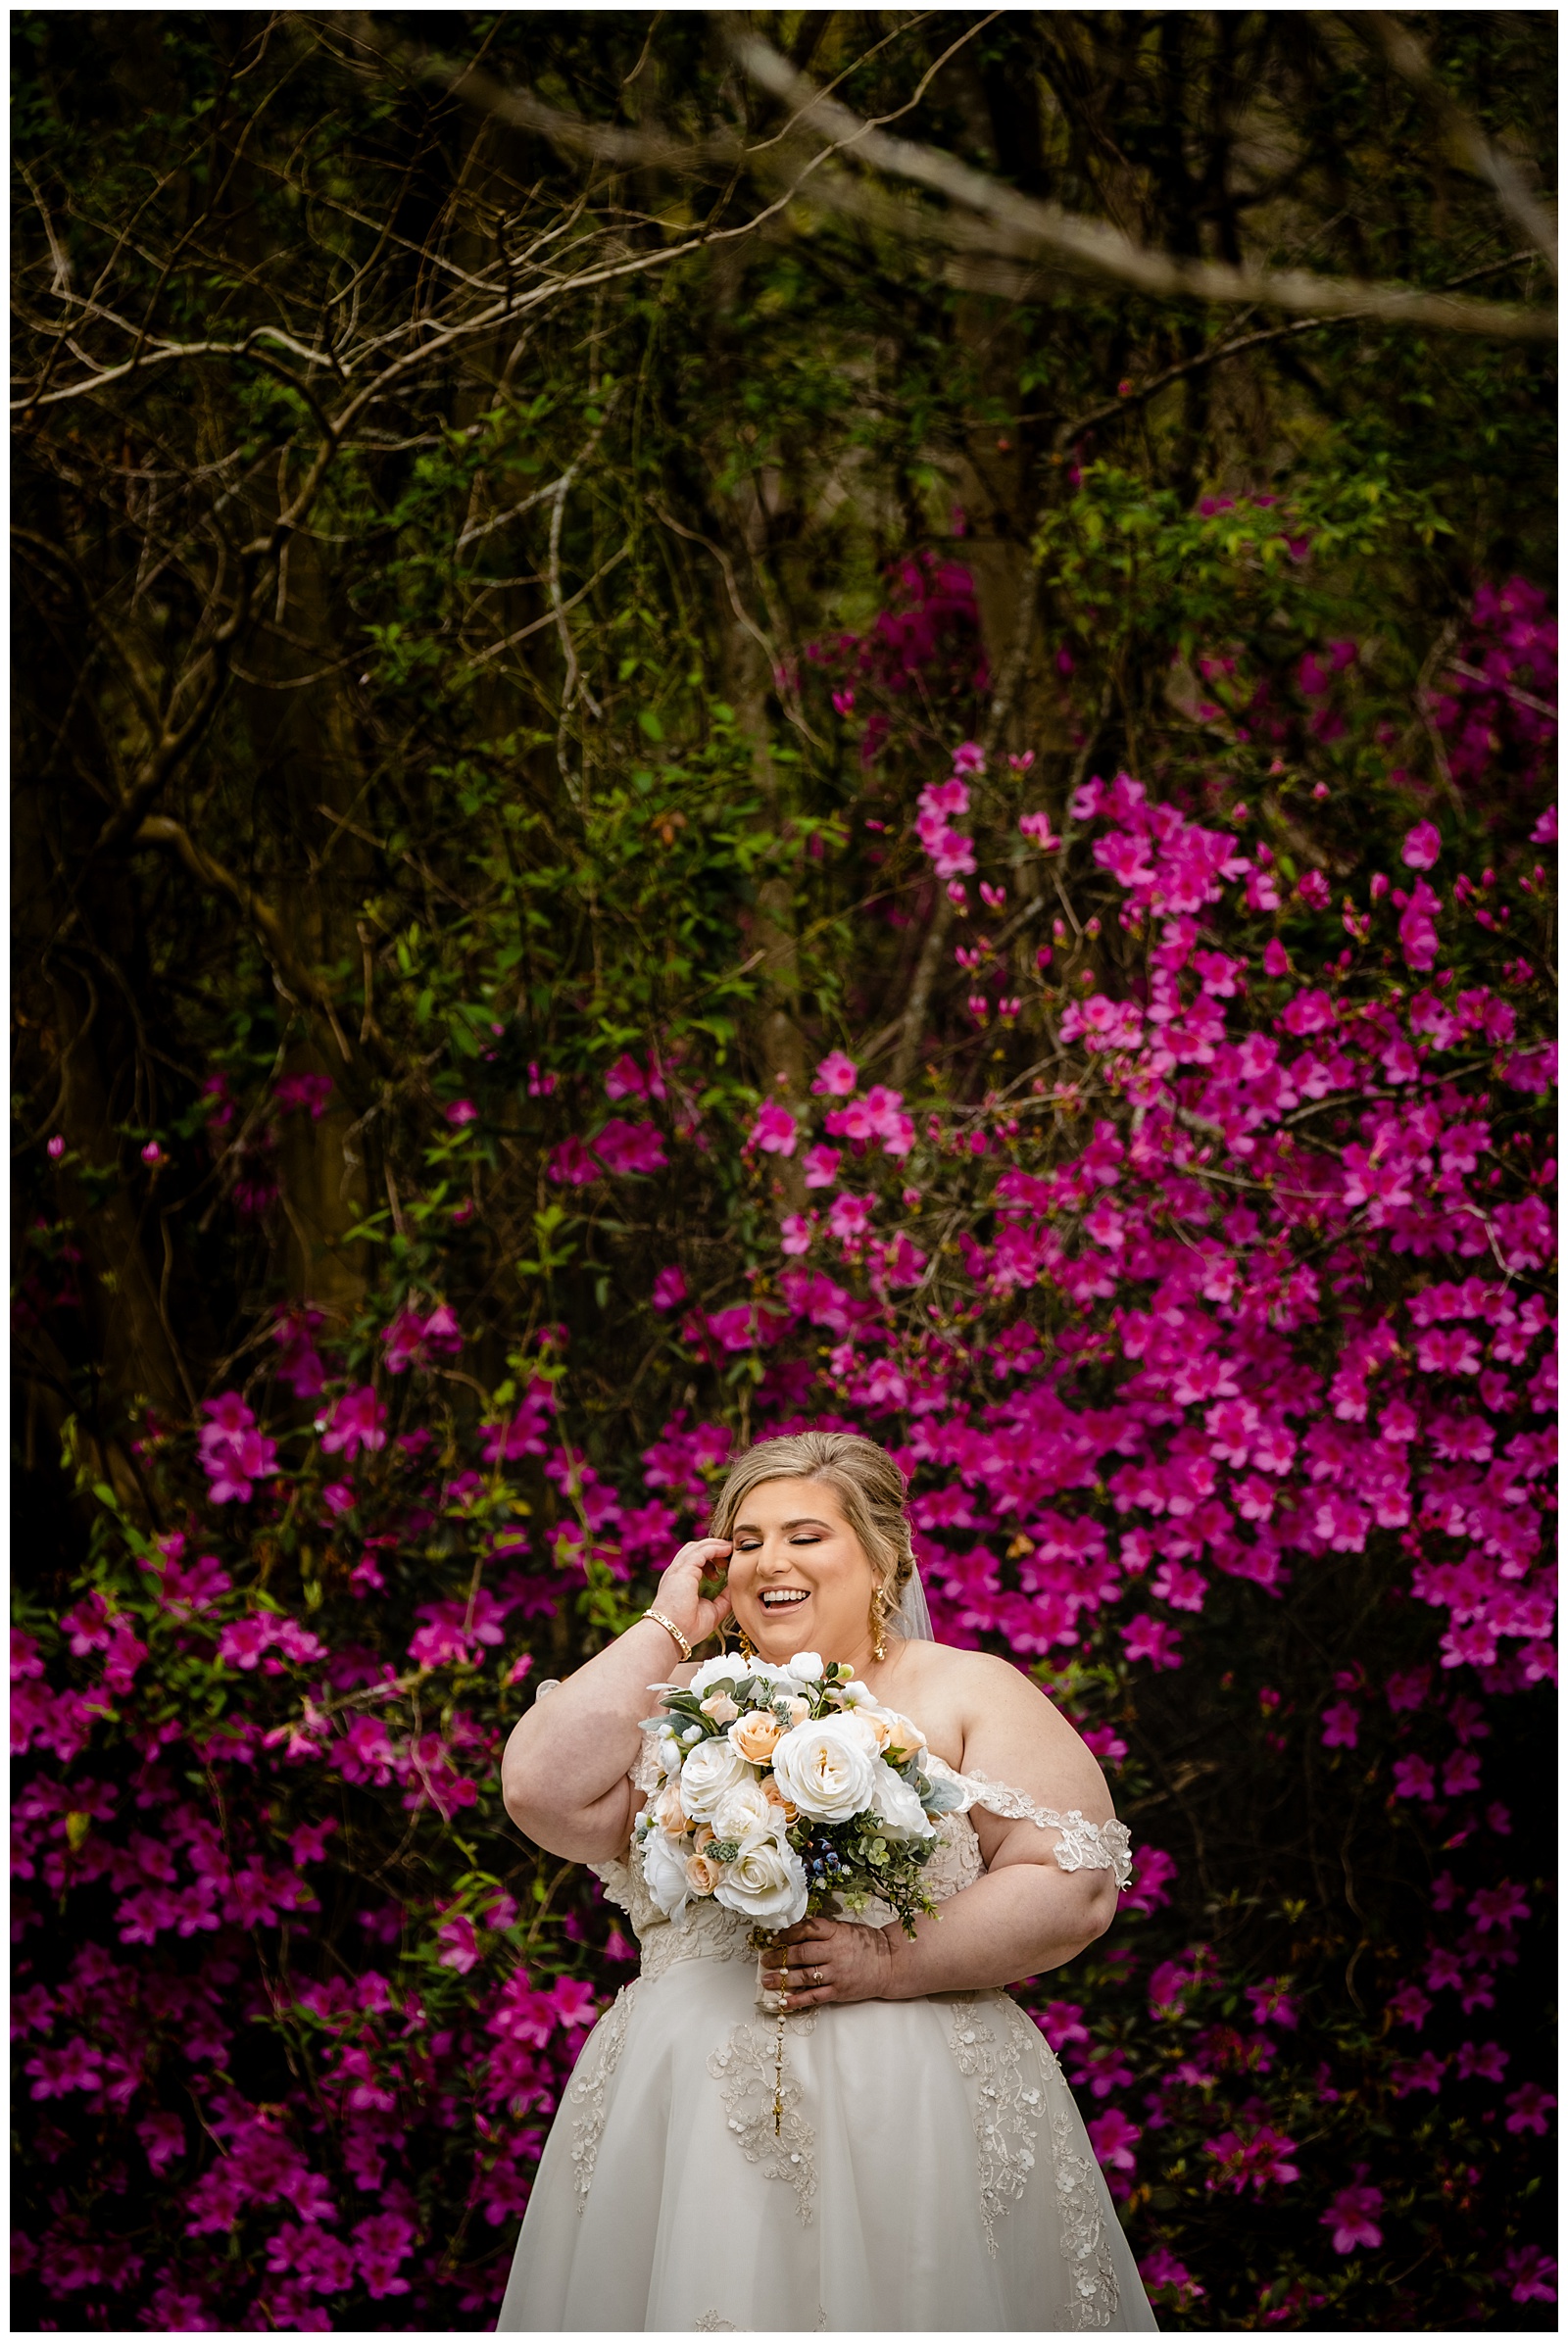 Laughing bride in outdoor bridal photography session